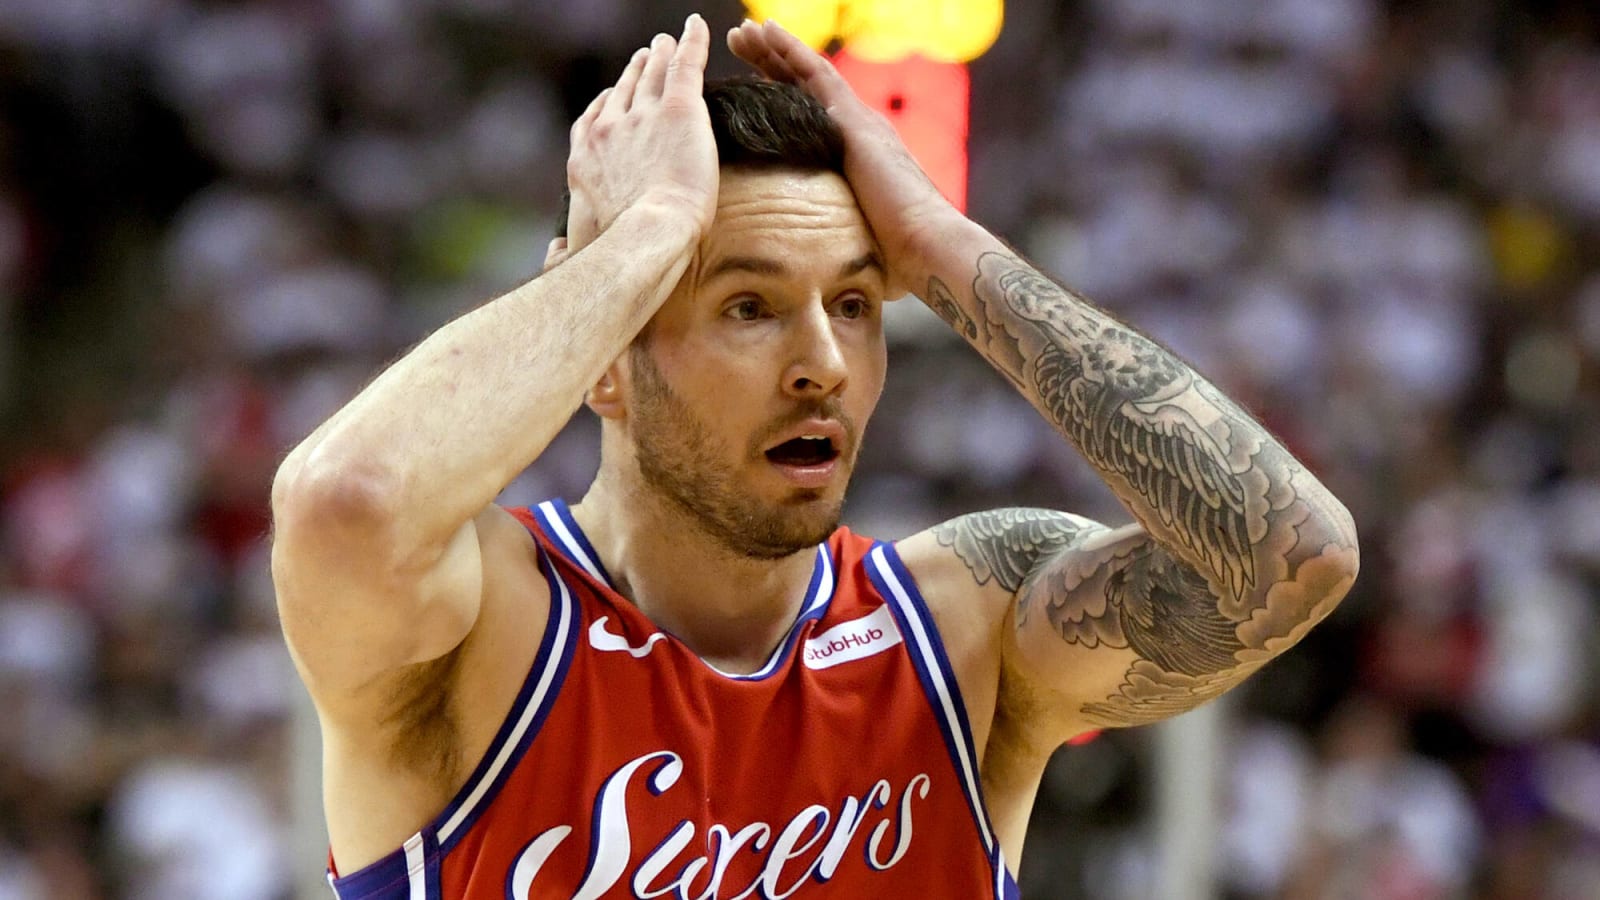 Report: Lakers Don’t Believe Tyronn Lue Will Become Available, Have ‘Zeroed In’ On JJ Redick